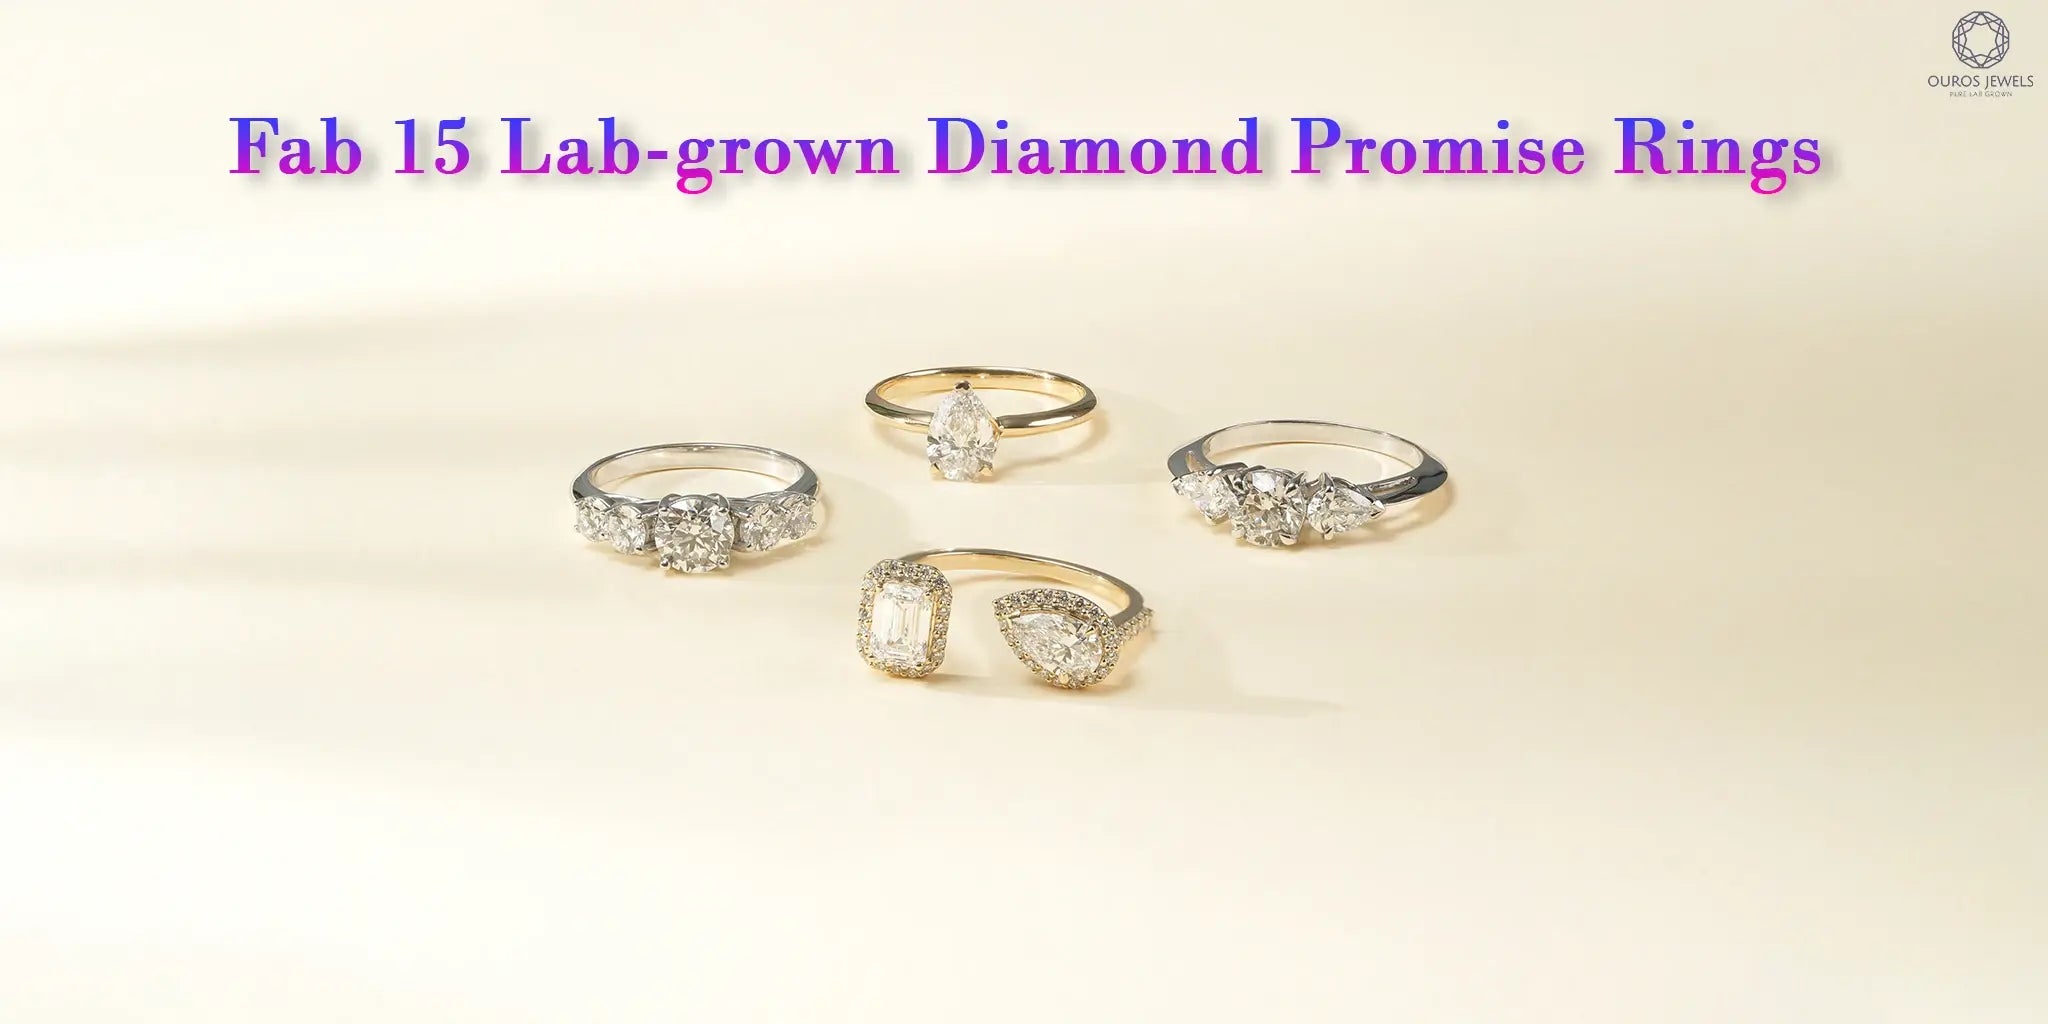 What Is A Promise Ring? - All You Need To Know